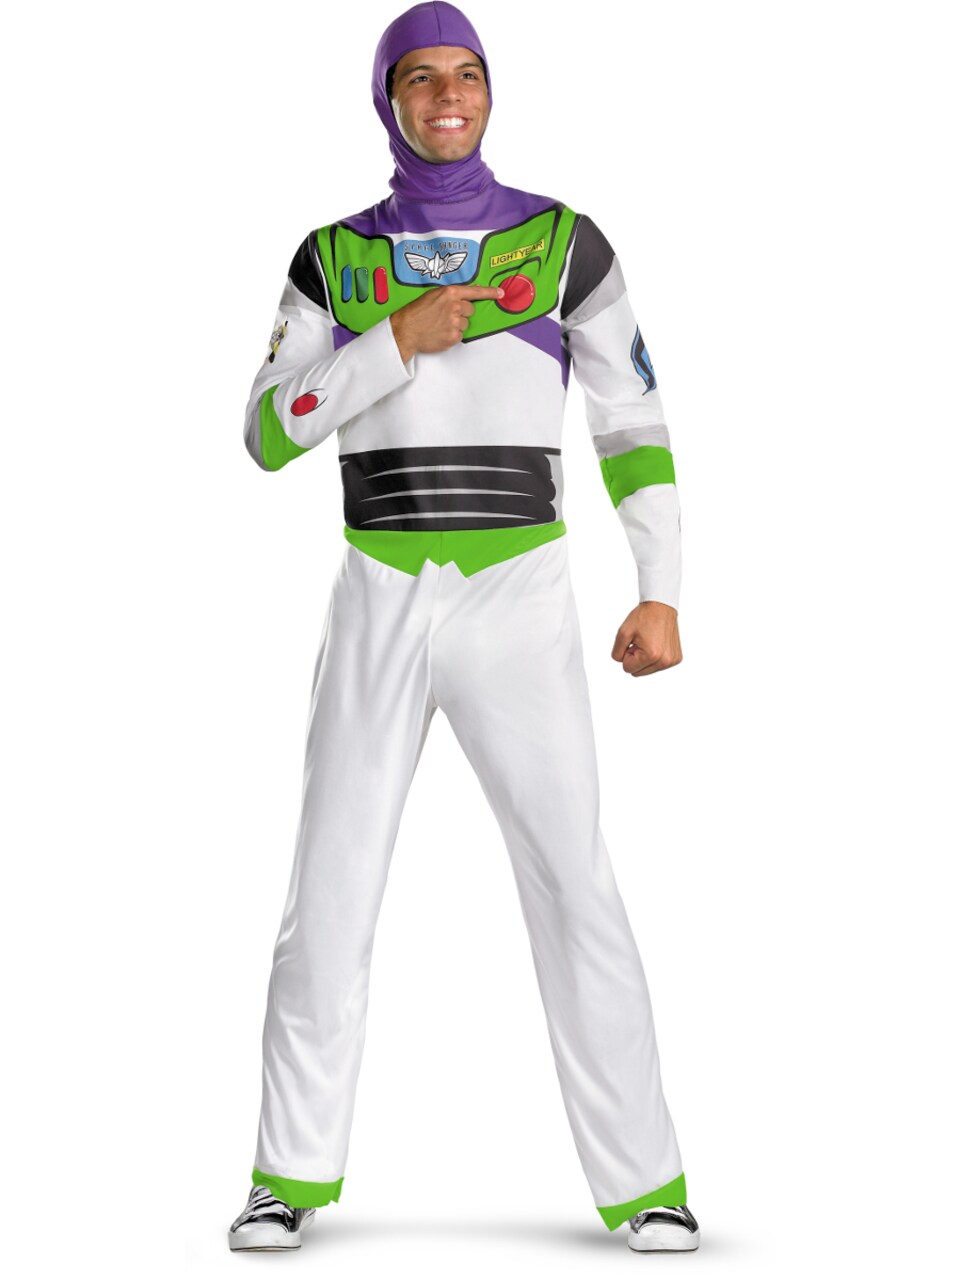 Mens Classic Toy Story 4 Buzz Lightyear Costume